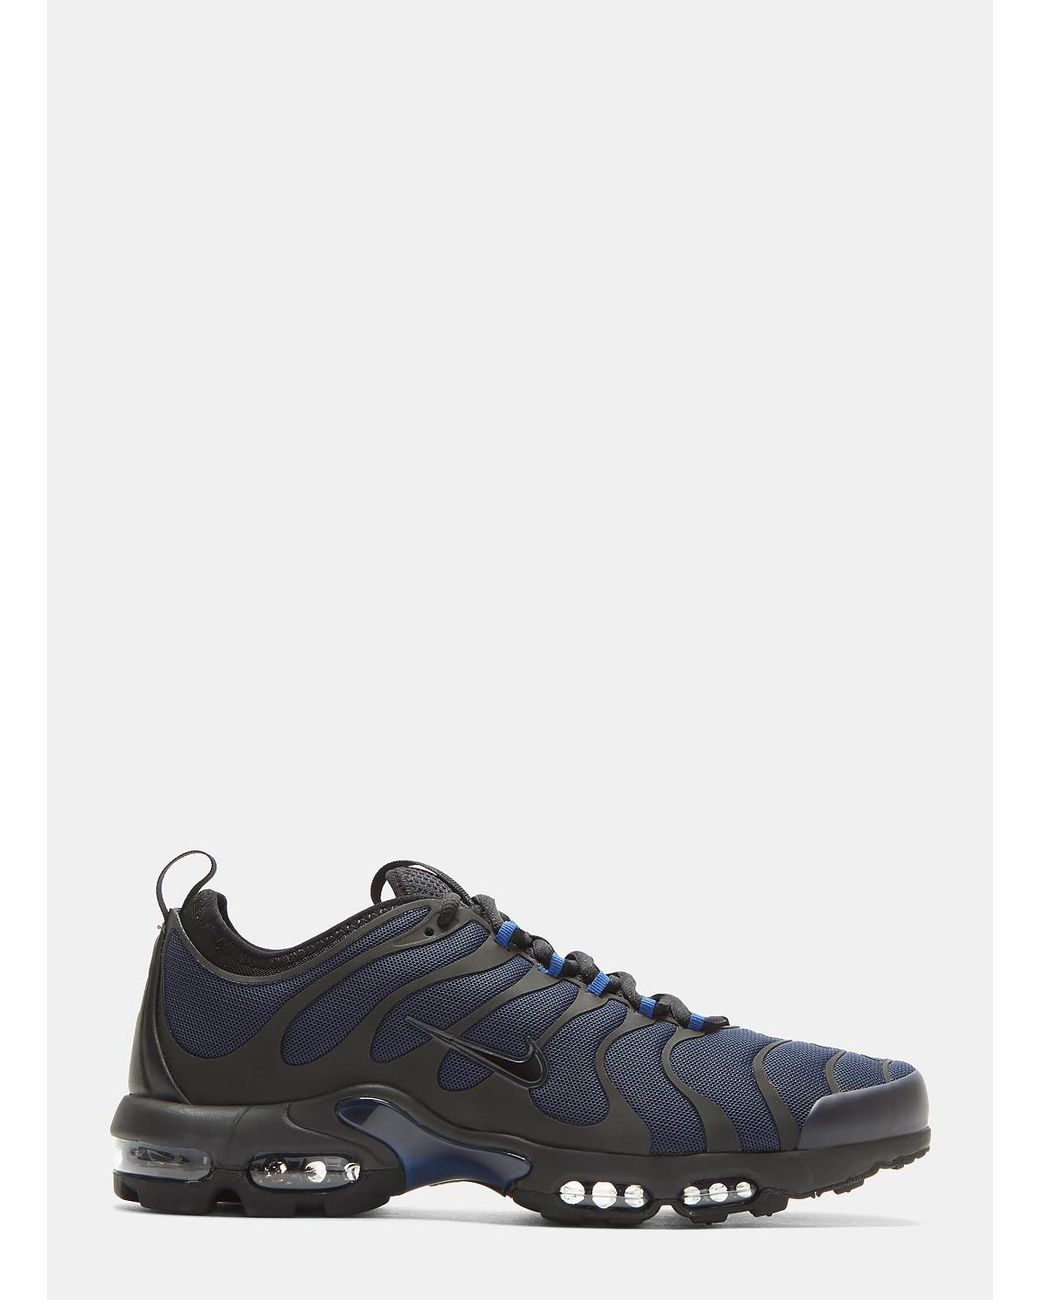 Nike Air Max Plus Tn Ultra Sneakers In Black And Navy for Men | Lyst Canada